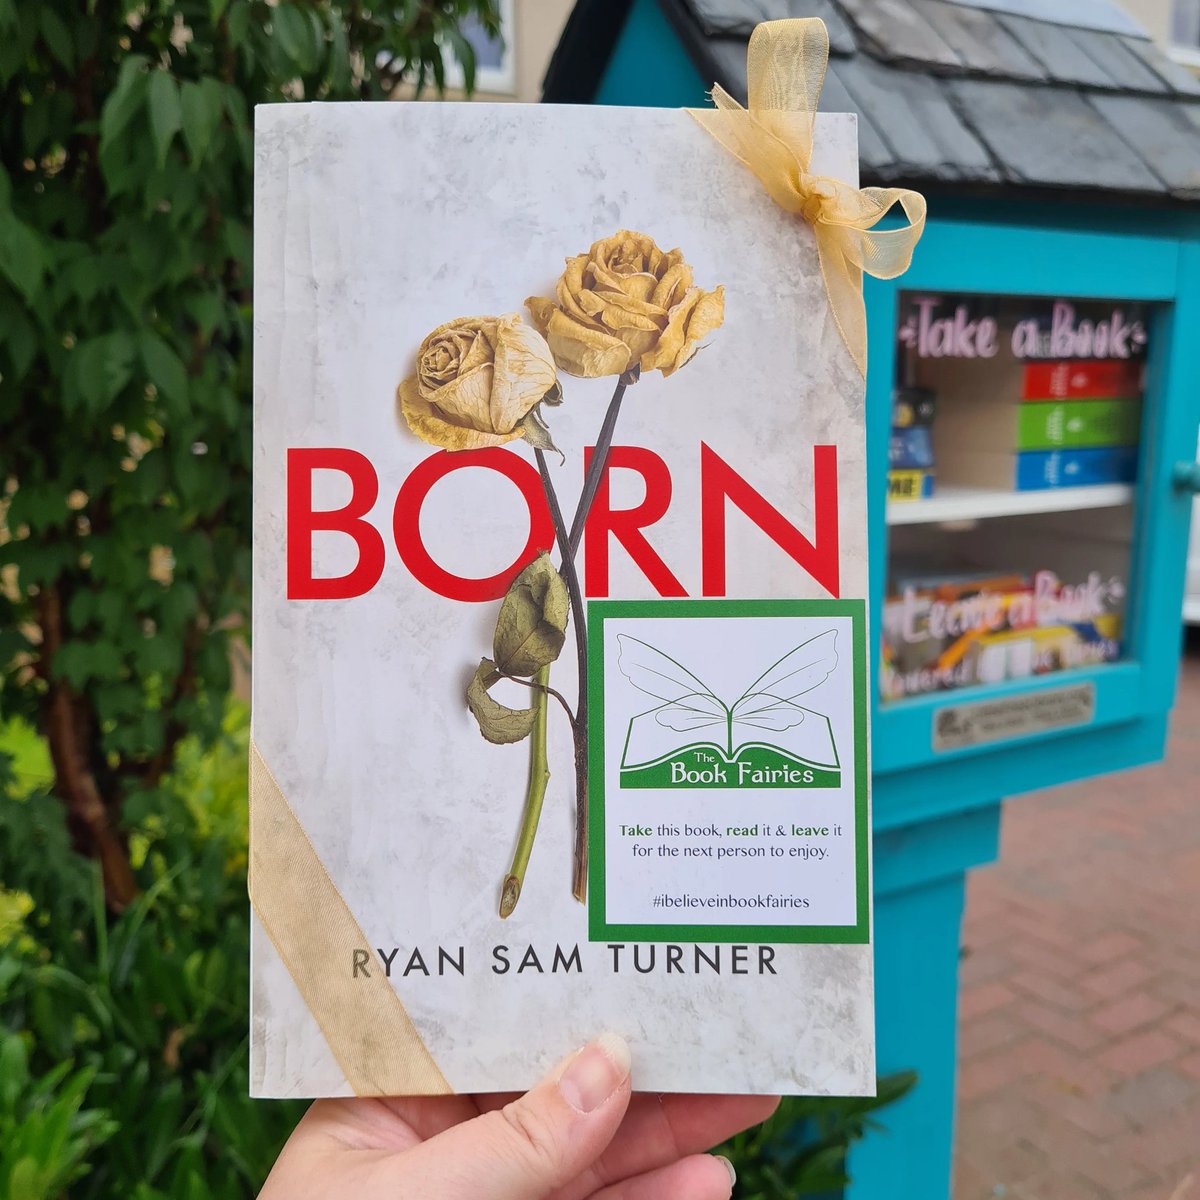 A copy of Born by Ryan Sam Turner was hidden in the Little Book House in Dunfermline today. Were  you the lucky finder? #IBelieveInBookFairies #IndieBookFairies #Born #BornRyanSamTurner #RyanSamTurner
#EdinburghWriter